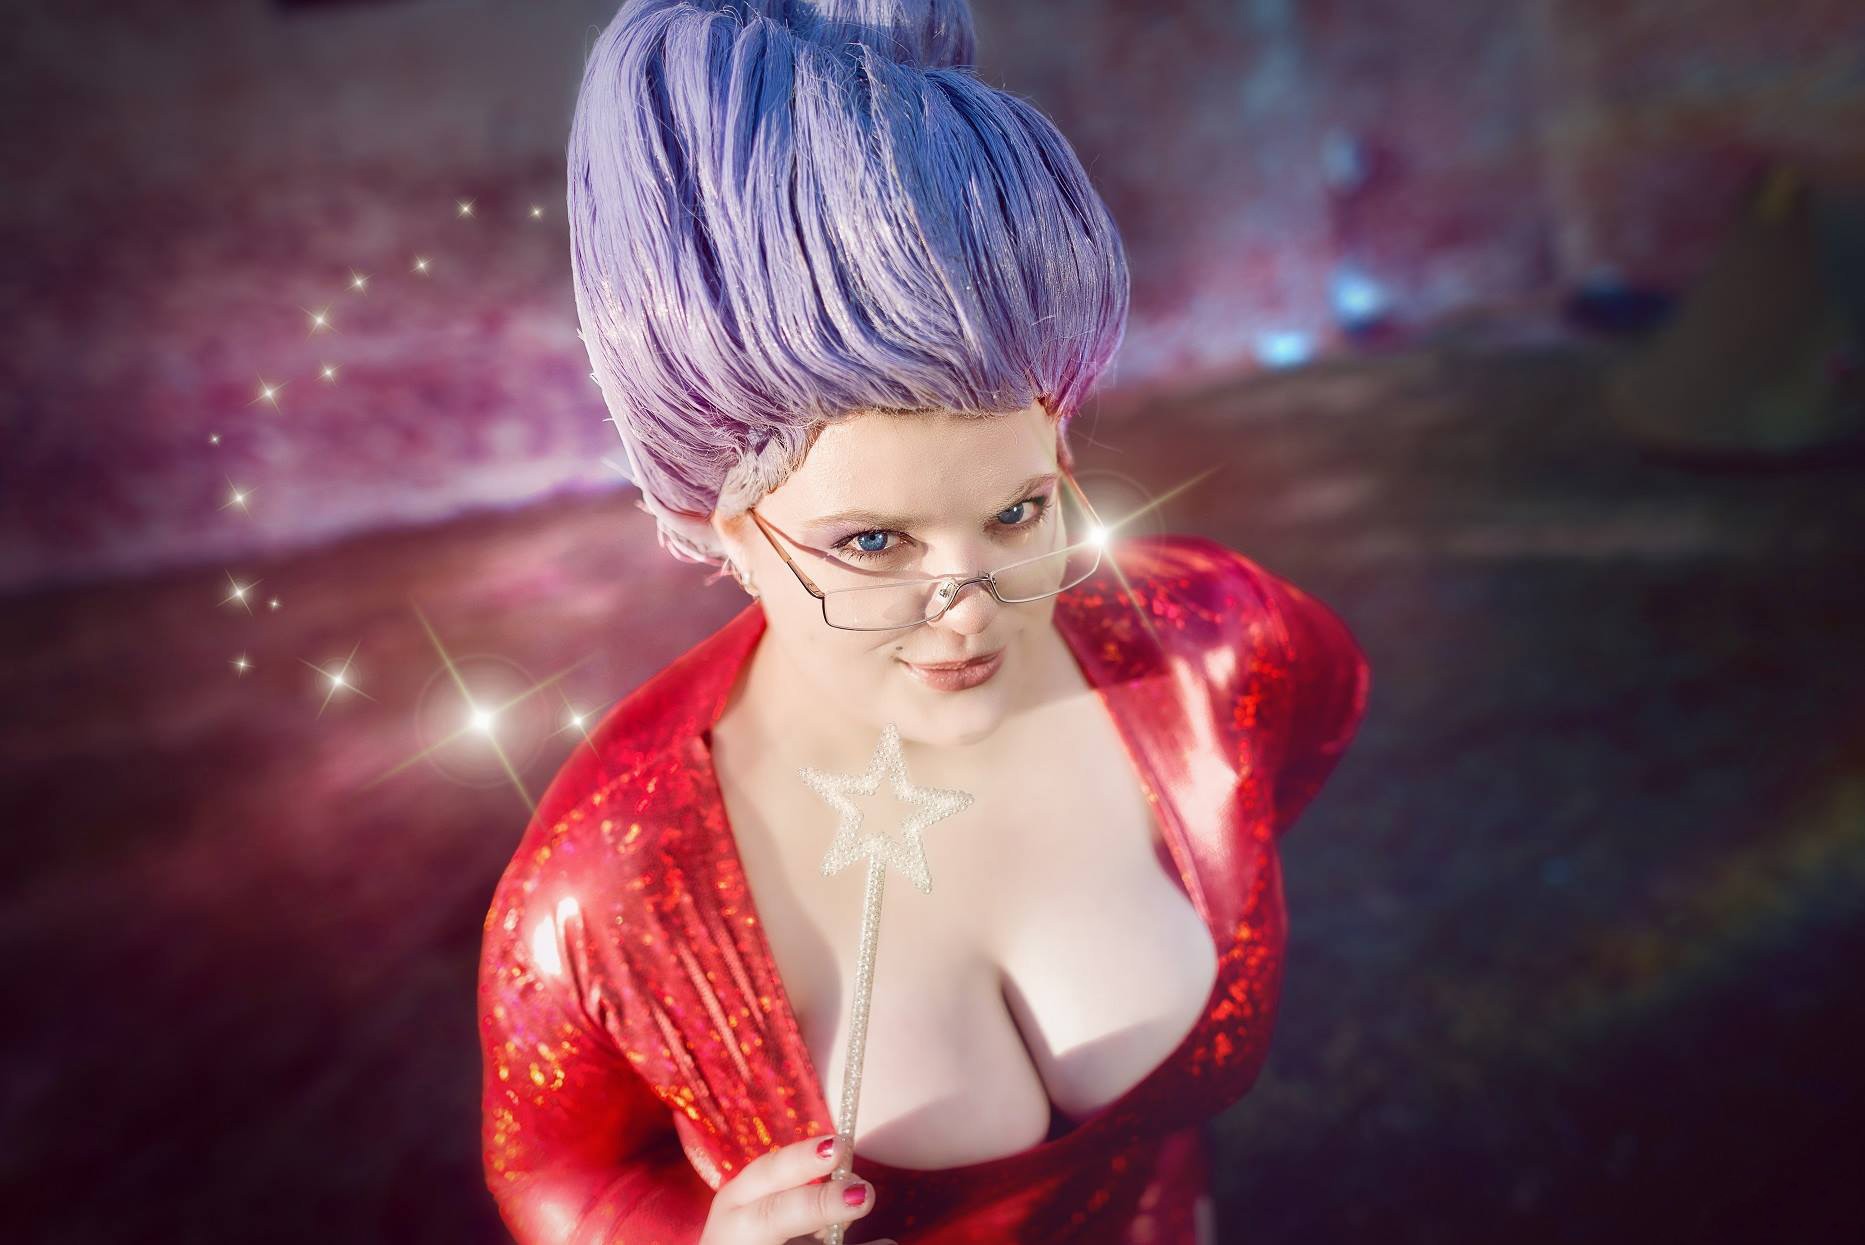 People 1865x1245 cosplay cleavage wigs women women with glasses witch fairy tale high angle boobs staff pale blue eyes fantasy girl red dress dress